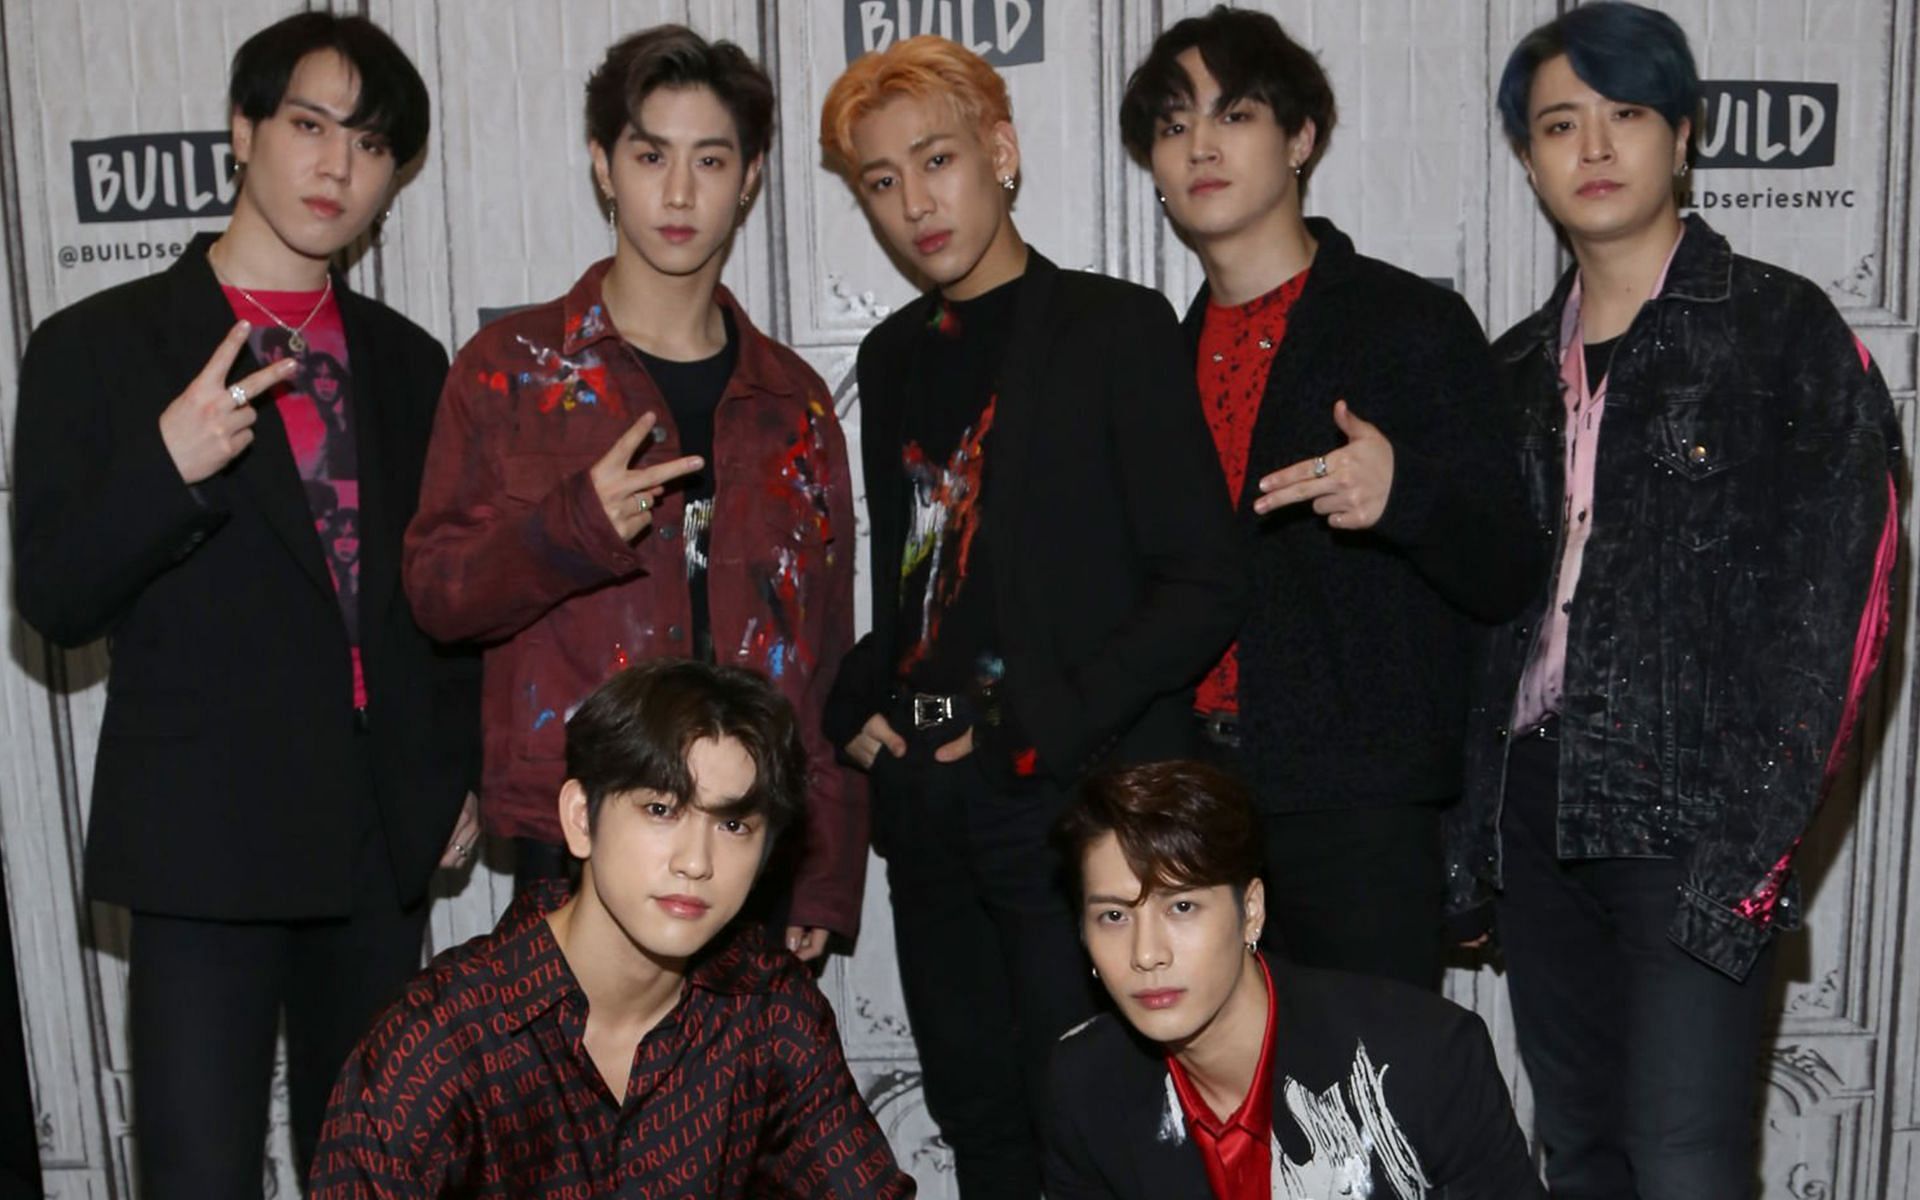 Reports reveal GOT7 reuniting for a group release in May 2022 (Image via Manny Carabel/Getty Images)